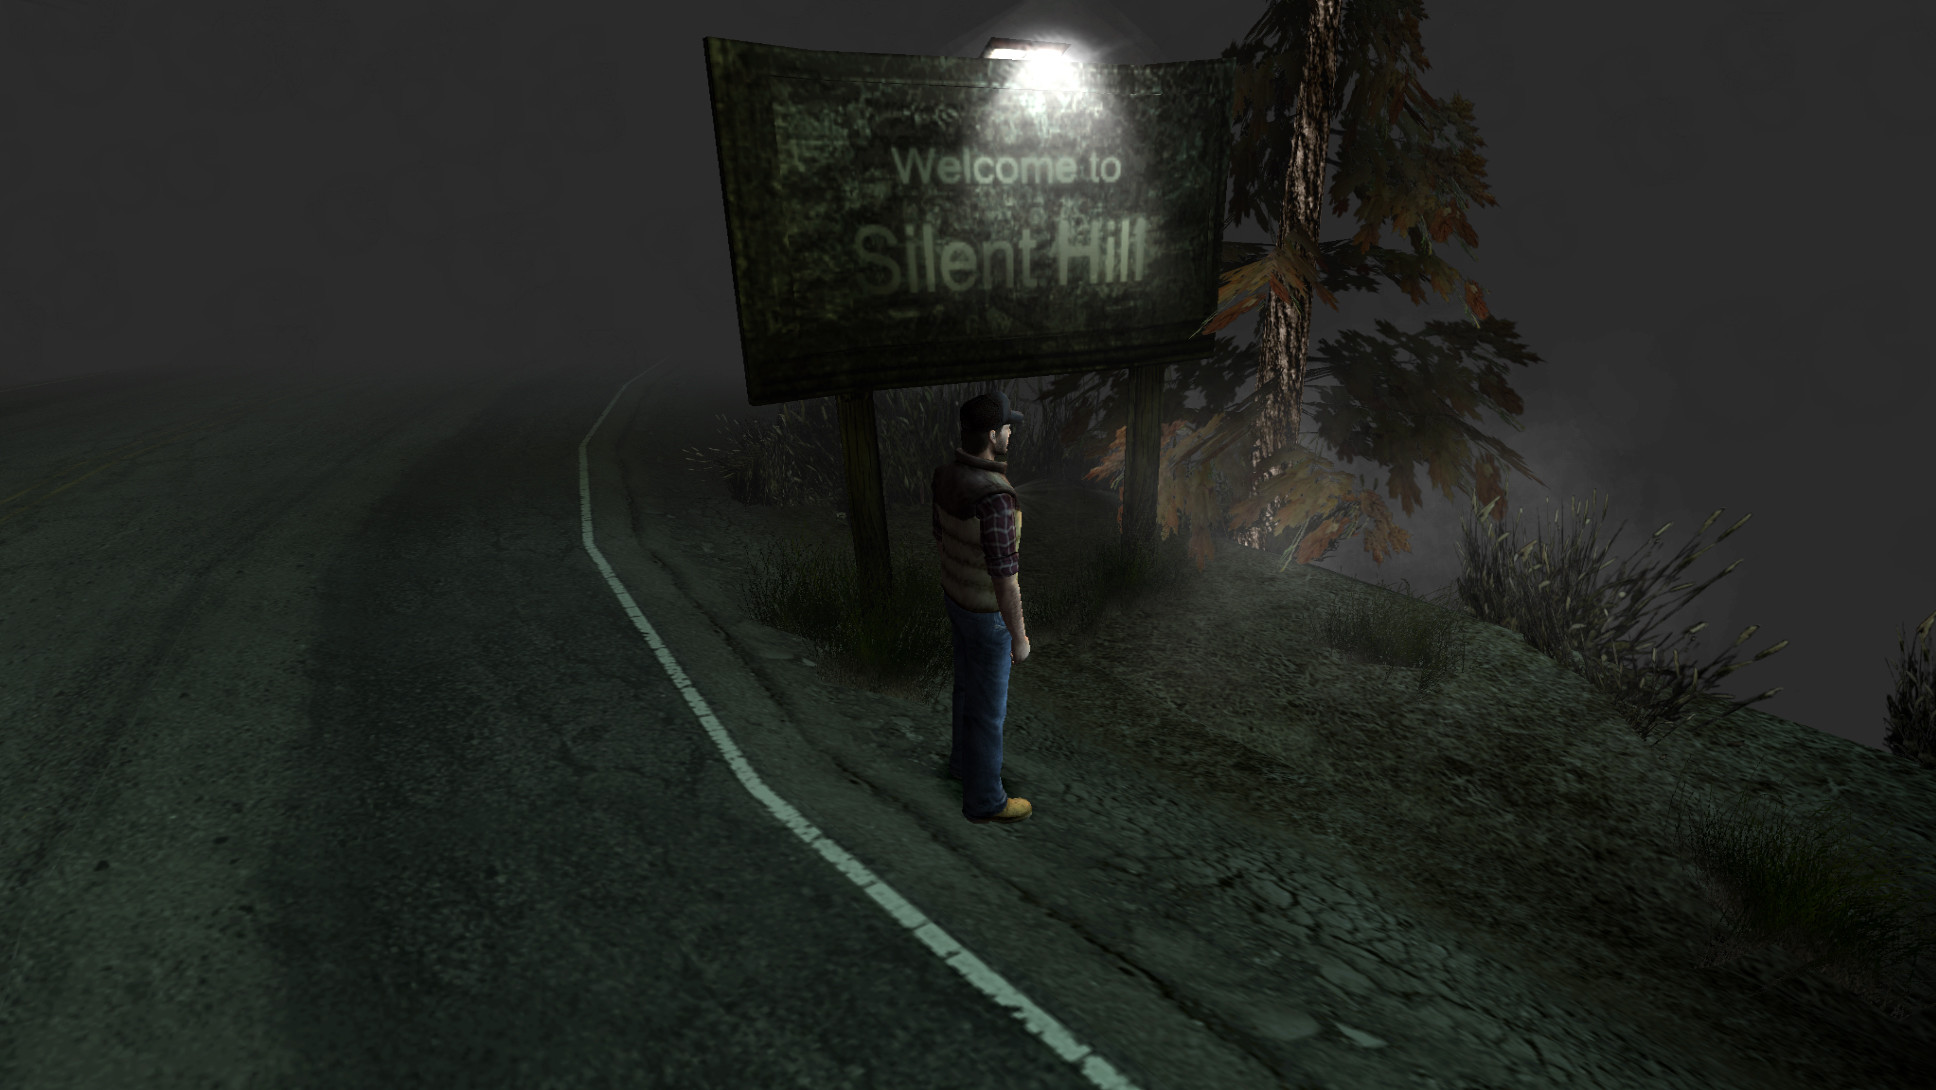 Silent Hill Background